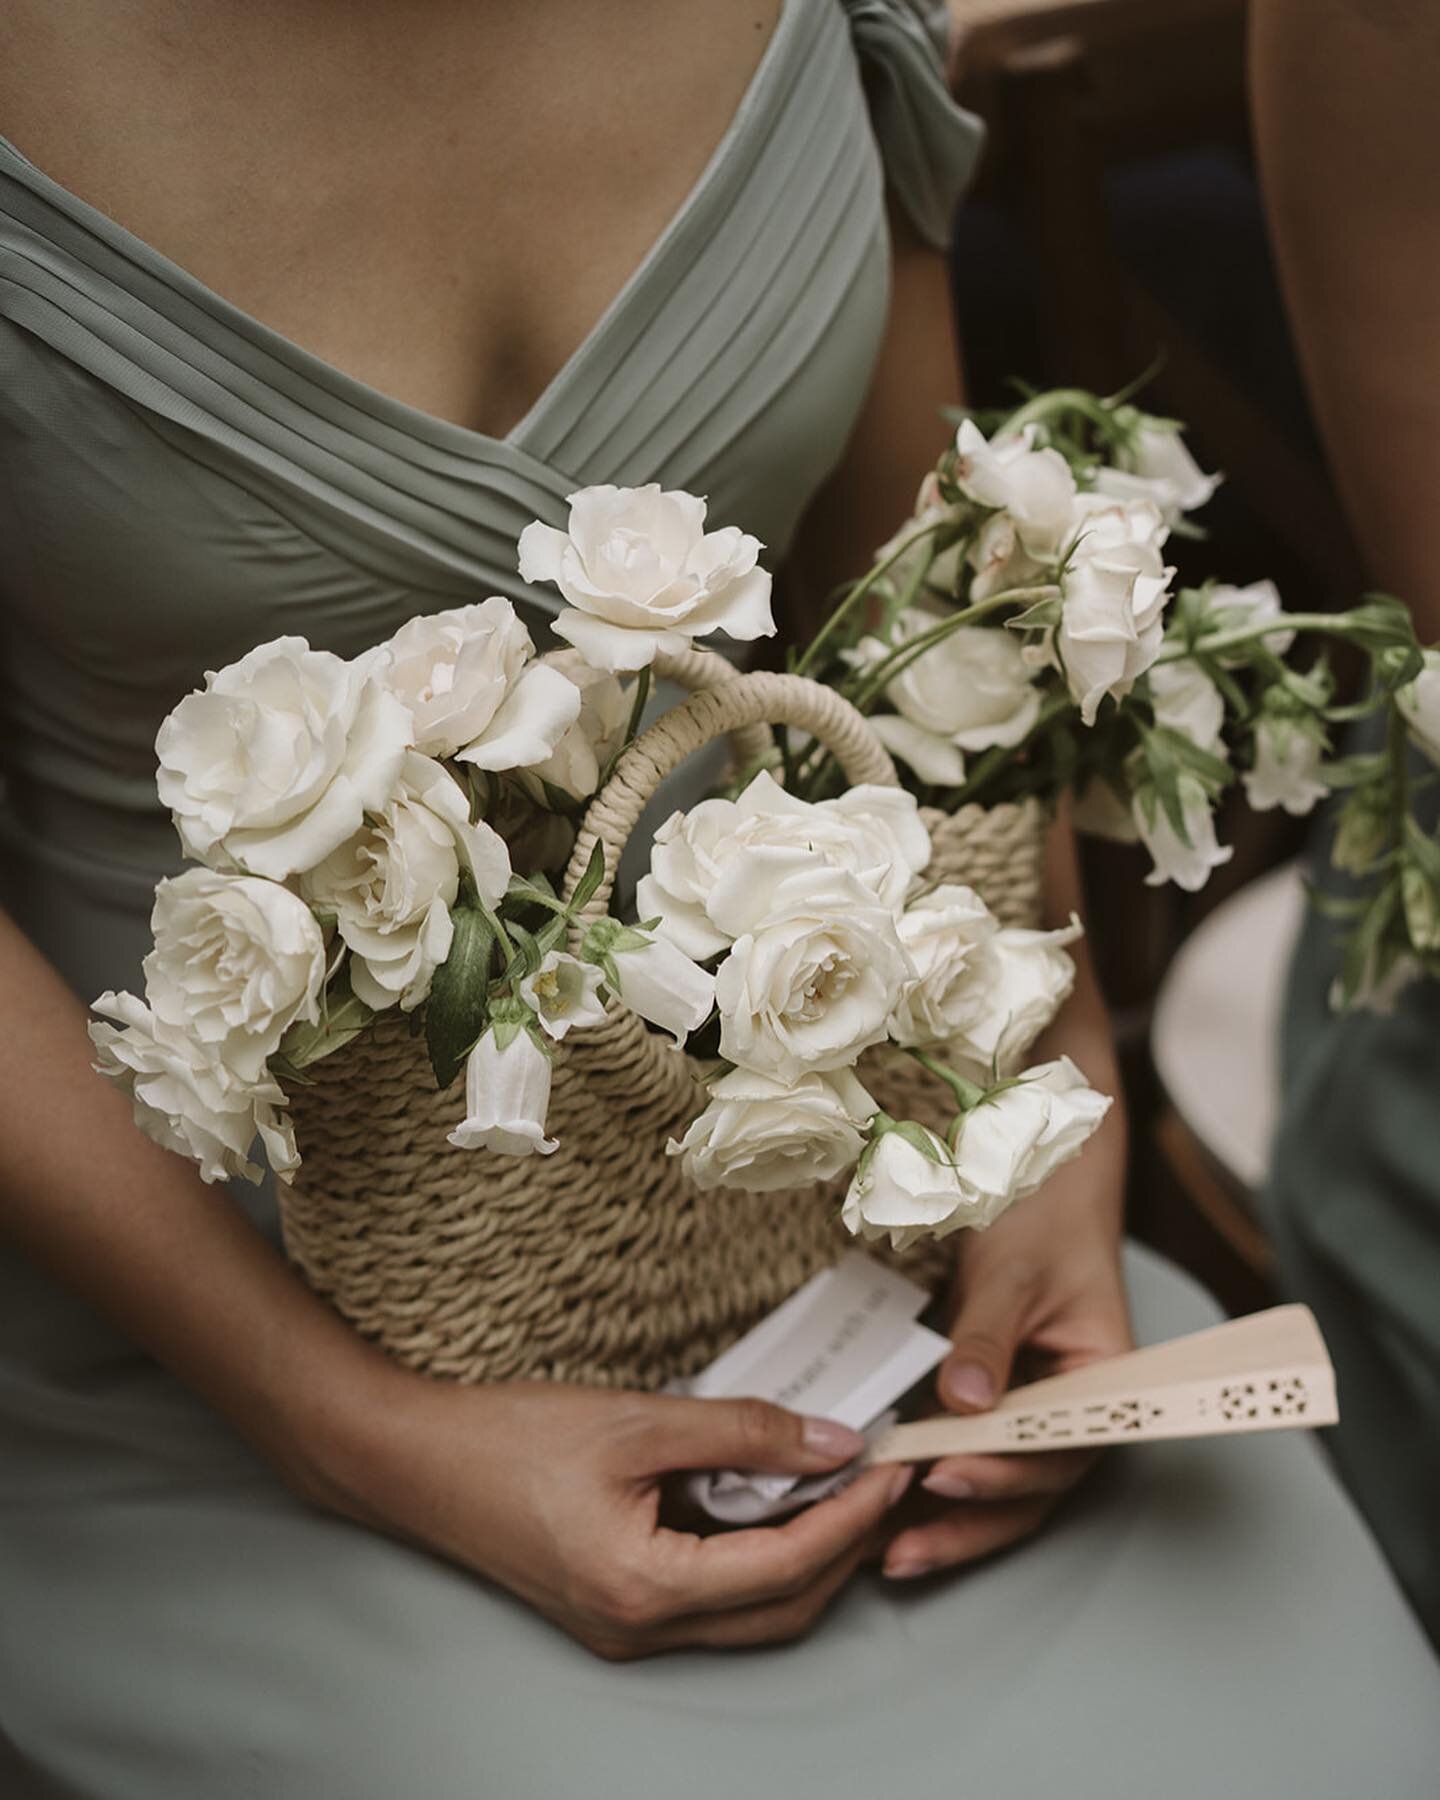 WHAT&rsquo;S IN YOUR PURSE?

Alex has been championing this twist on a traditional bridesmaid bouquet in her editorial work for a long time; we finally got to experiment in real life for J+A&rsquo;s wedding. This idea was beautifully curated by @best